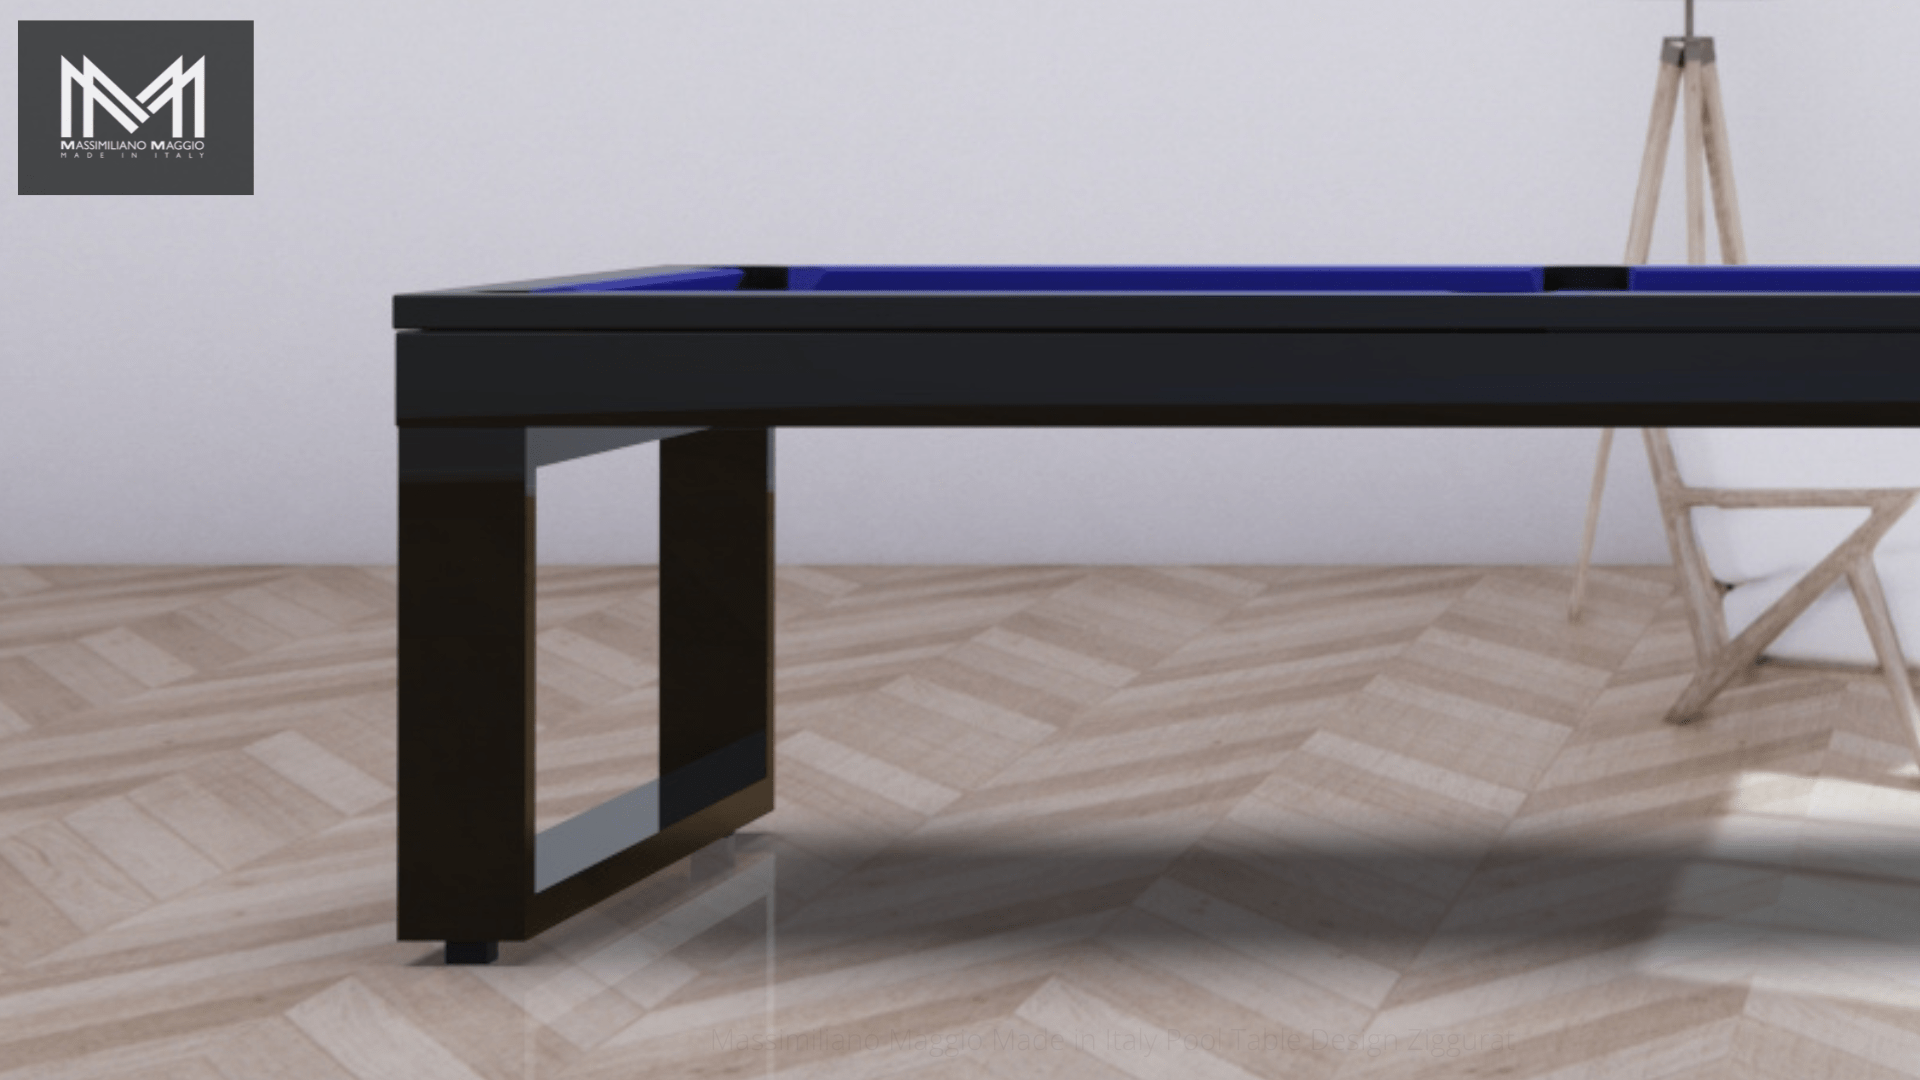 Luxury Pool Table 3 NEW Icon Exclusive Pool table by Massimiliano Maggio Made in Italy